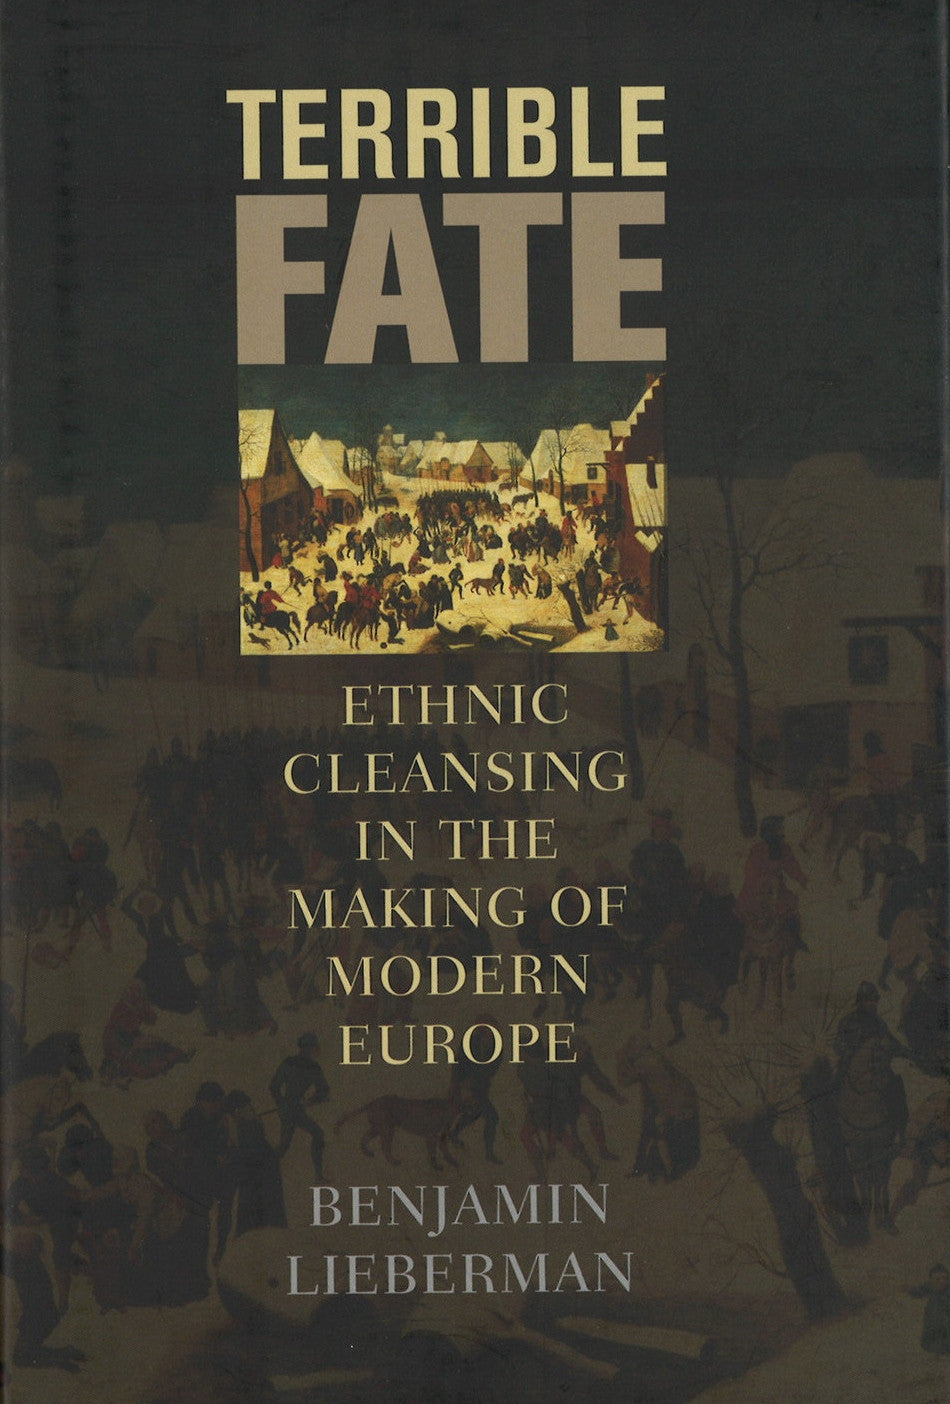 TERRIBLE FATE: Ethnic Cleansing in the Making of Modern Europe